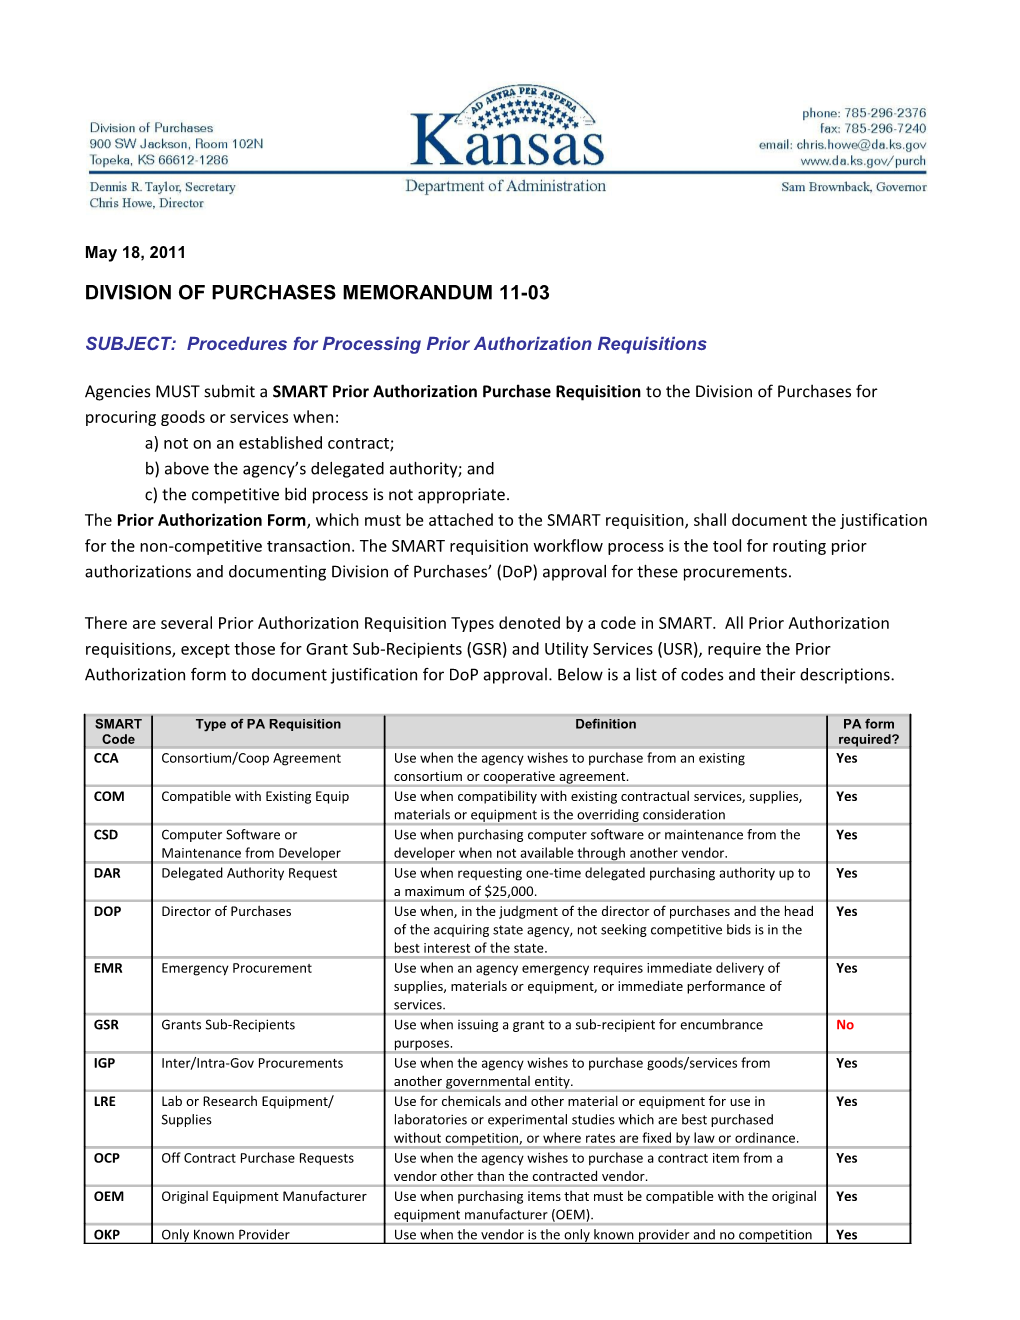 SUBJECT: Procedures for Processing Prior Authorization Requisitions